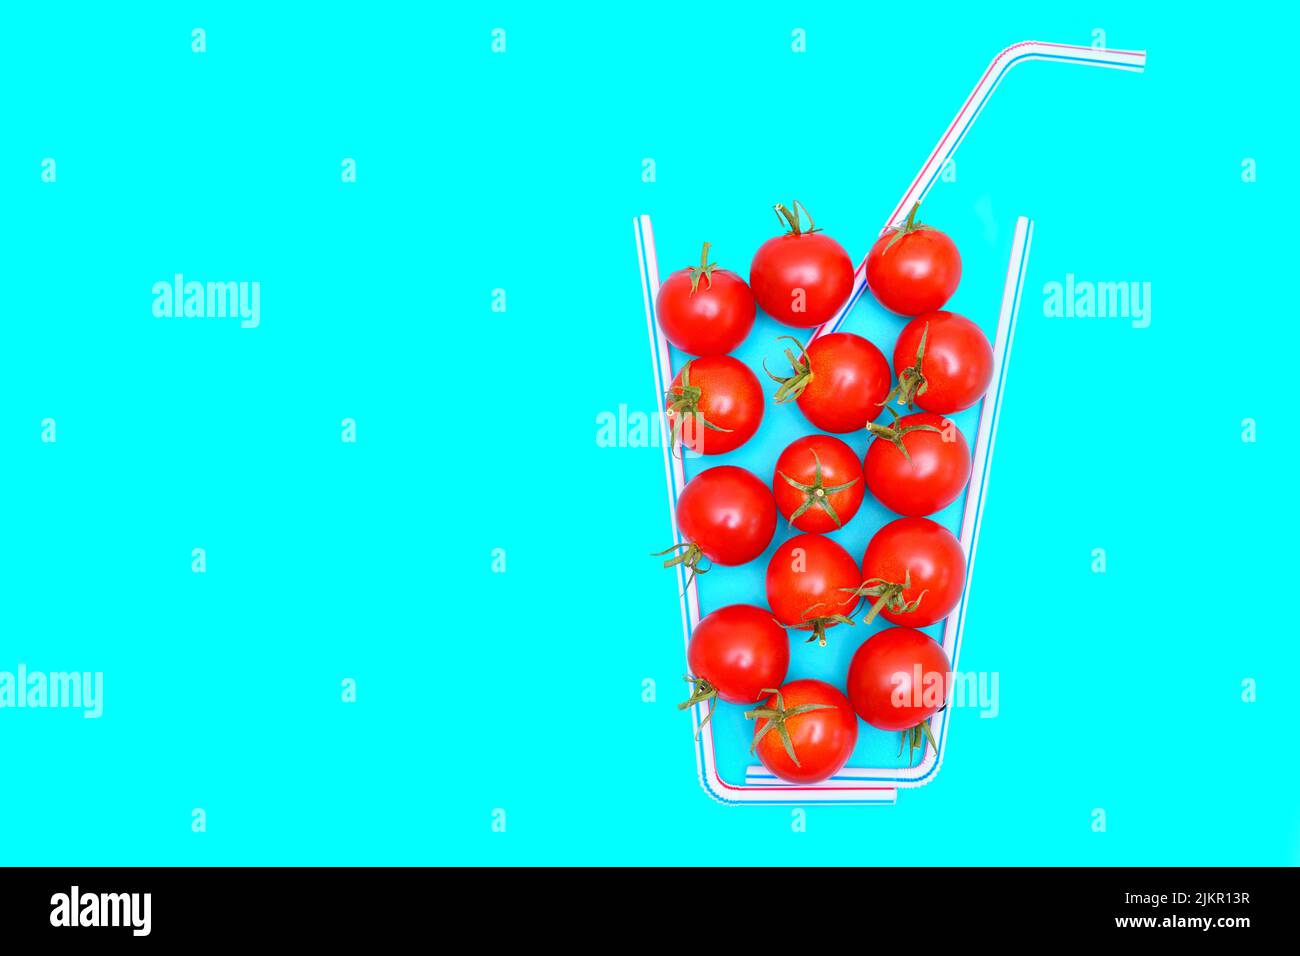 Cocktail tomatoes and drinking straws arranged into a juicy composition on blue background with copy space. Stock Photo